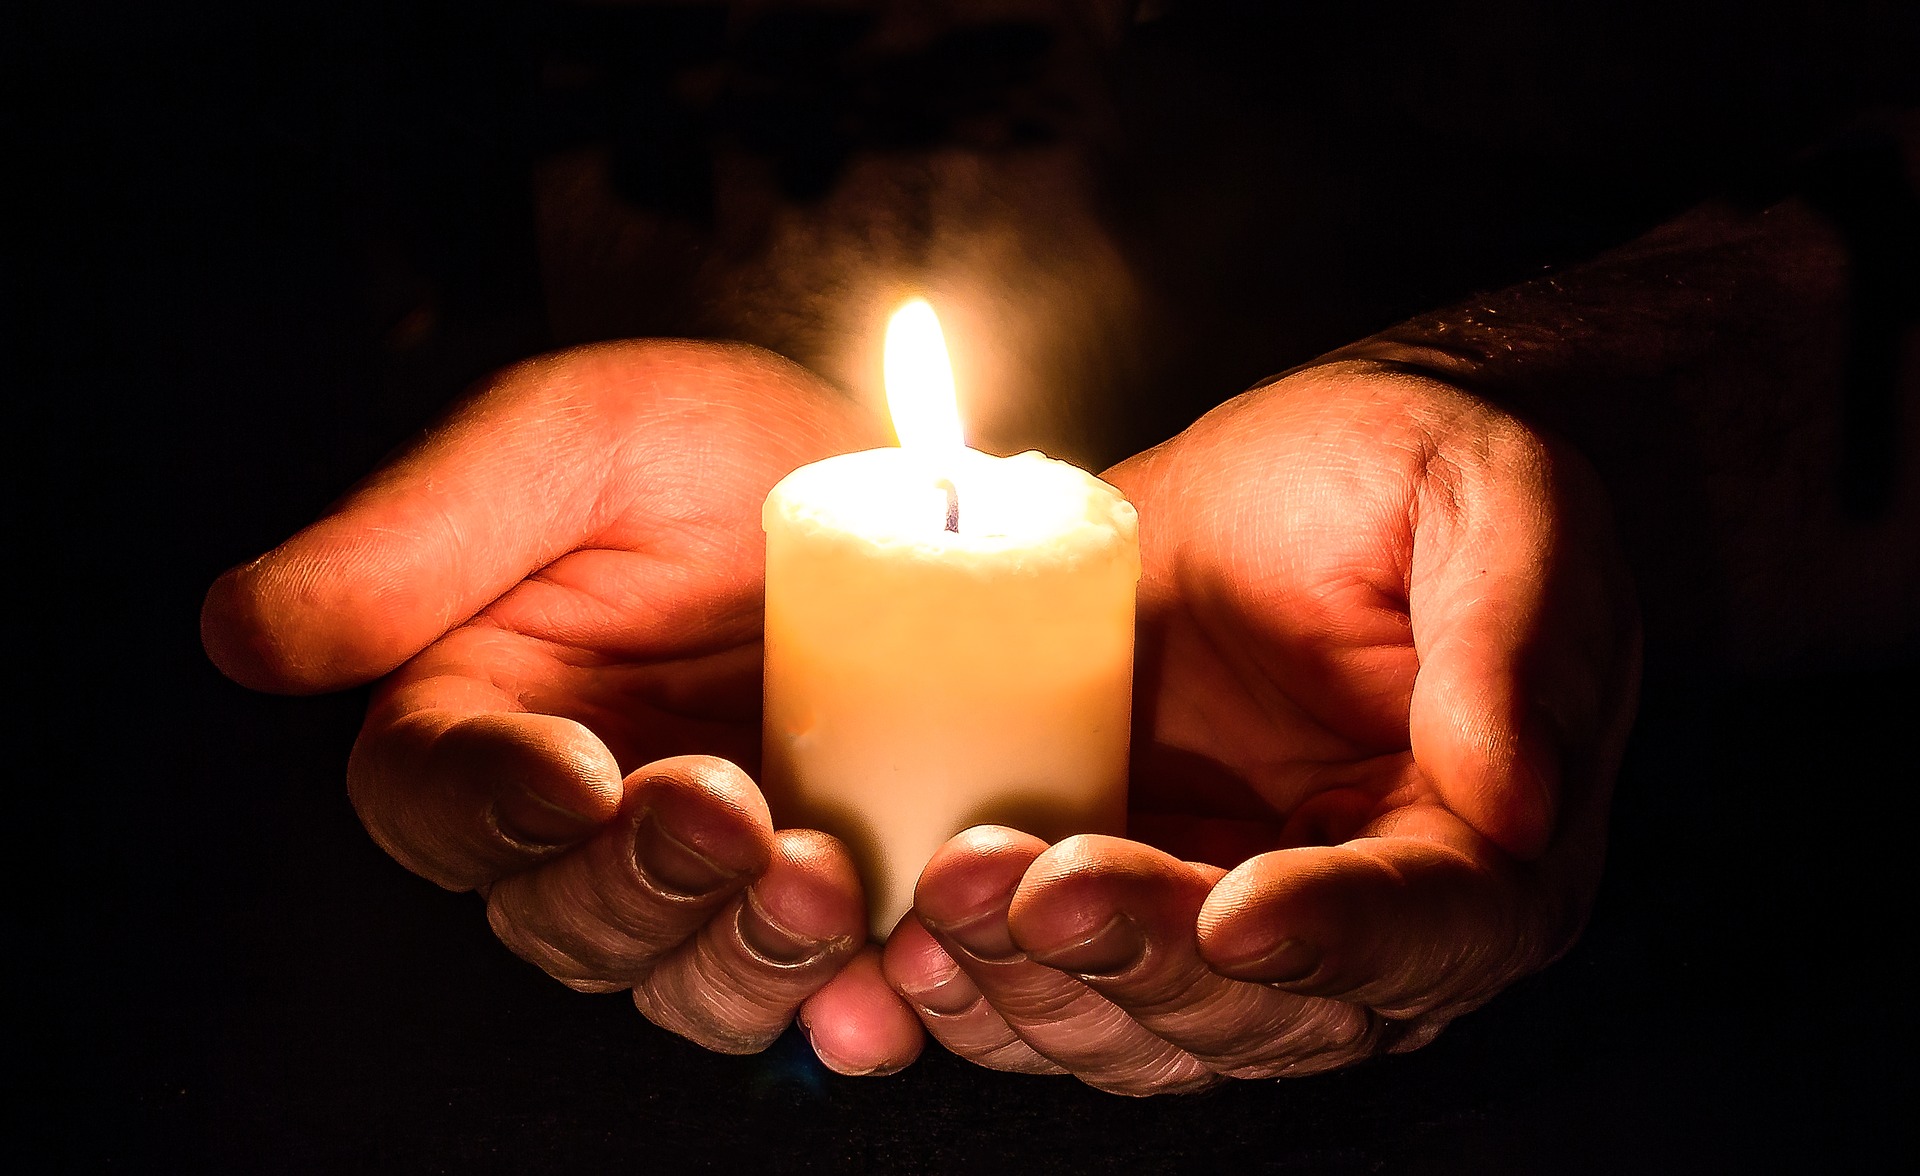 Hands holding a lit candle.